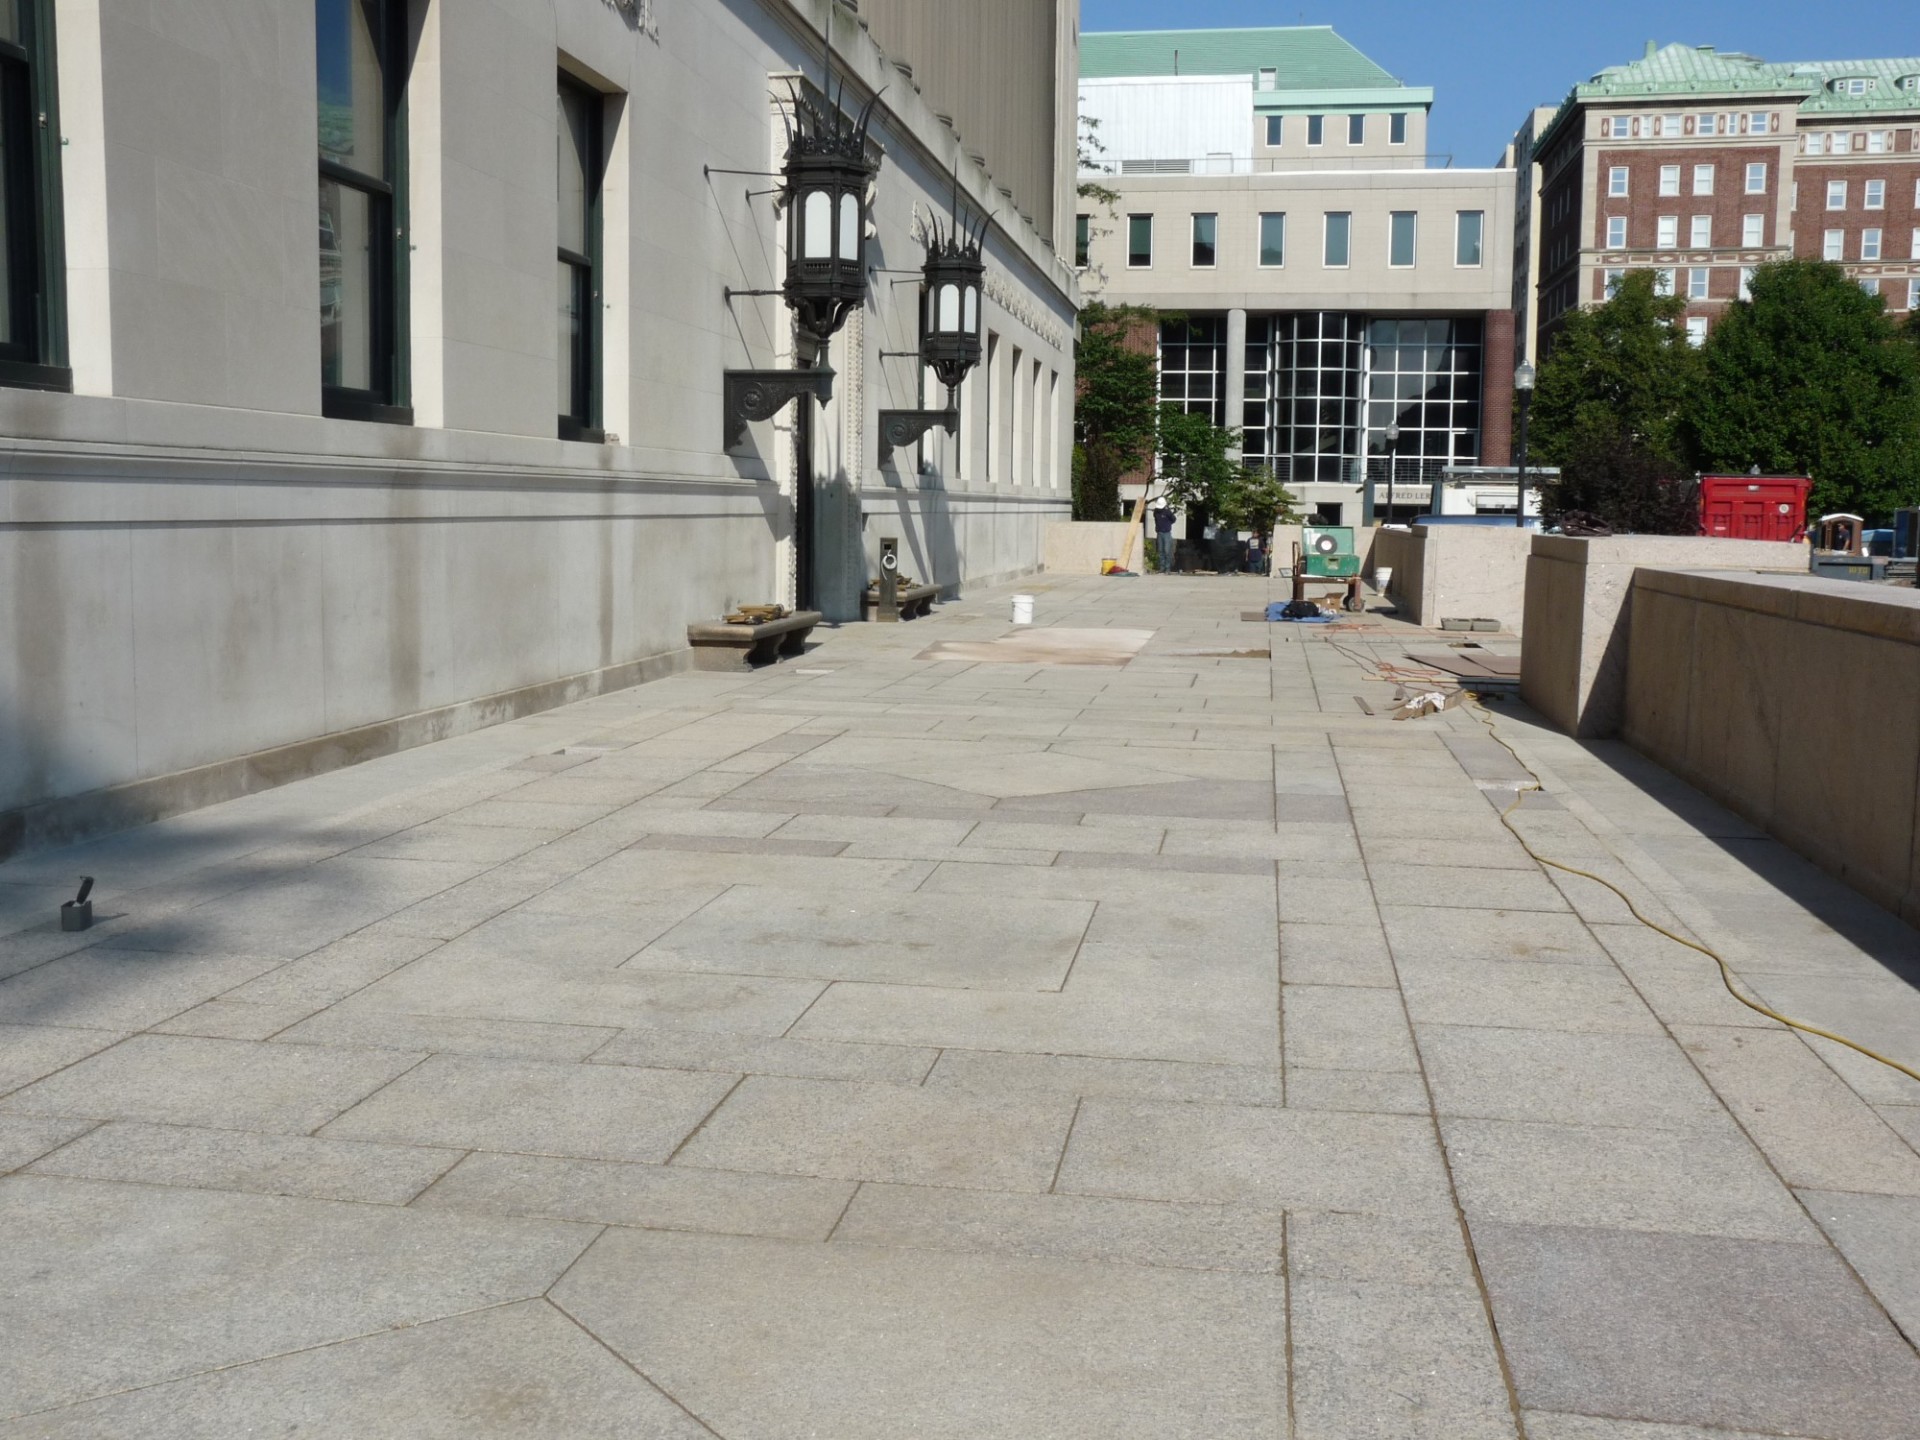 Butler Plaza granite pavers have been placed, readying for final touches and clean-up for the reopening of Butler Library's main entrance on Sept. 5. (Photo from August 31, 2017)